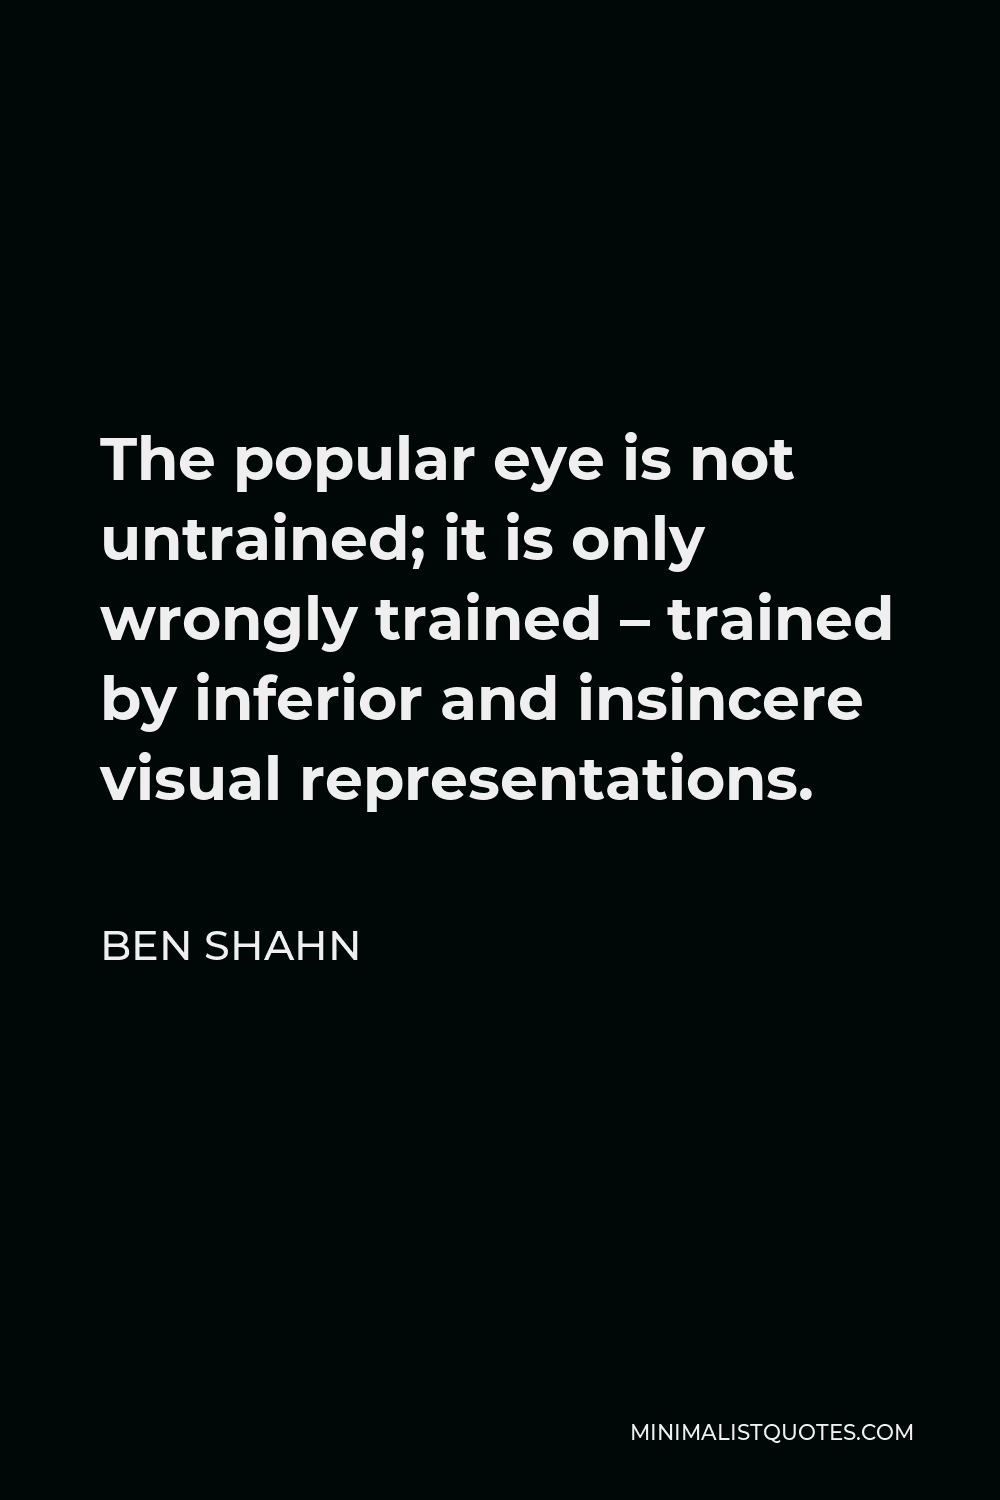 Ben Shahn Quote - The popular eye is not untrained; it is only wrongly trained – trained by inferior and insincere visual representations.